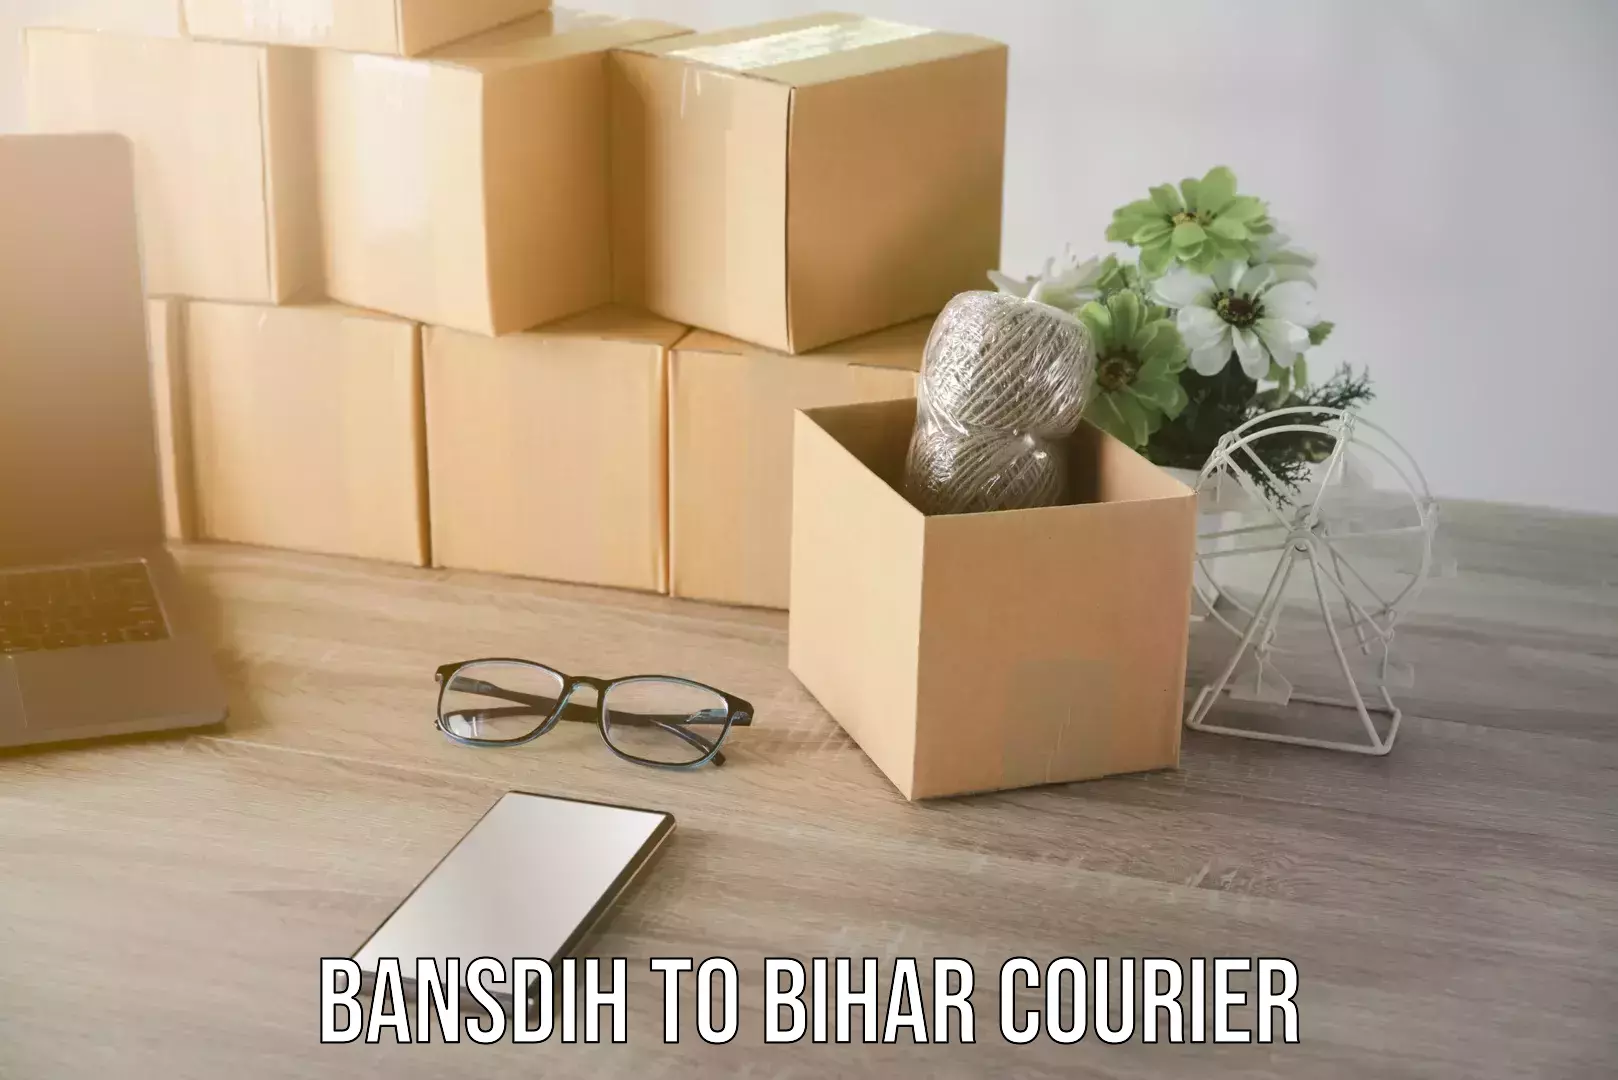 End-to-end delivery in Bansdih to Bihar